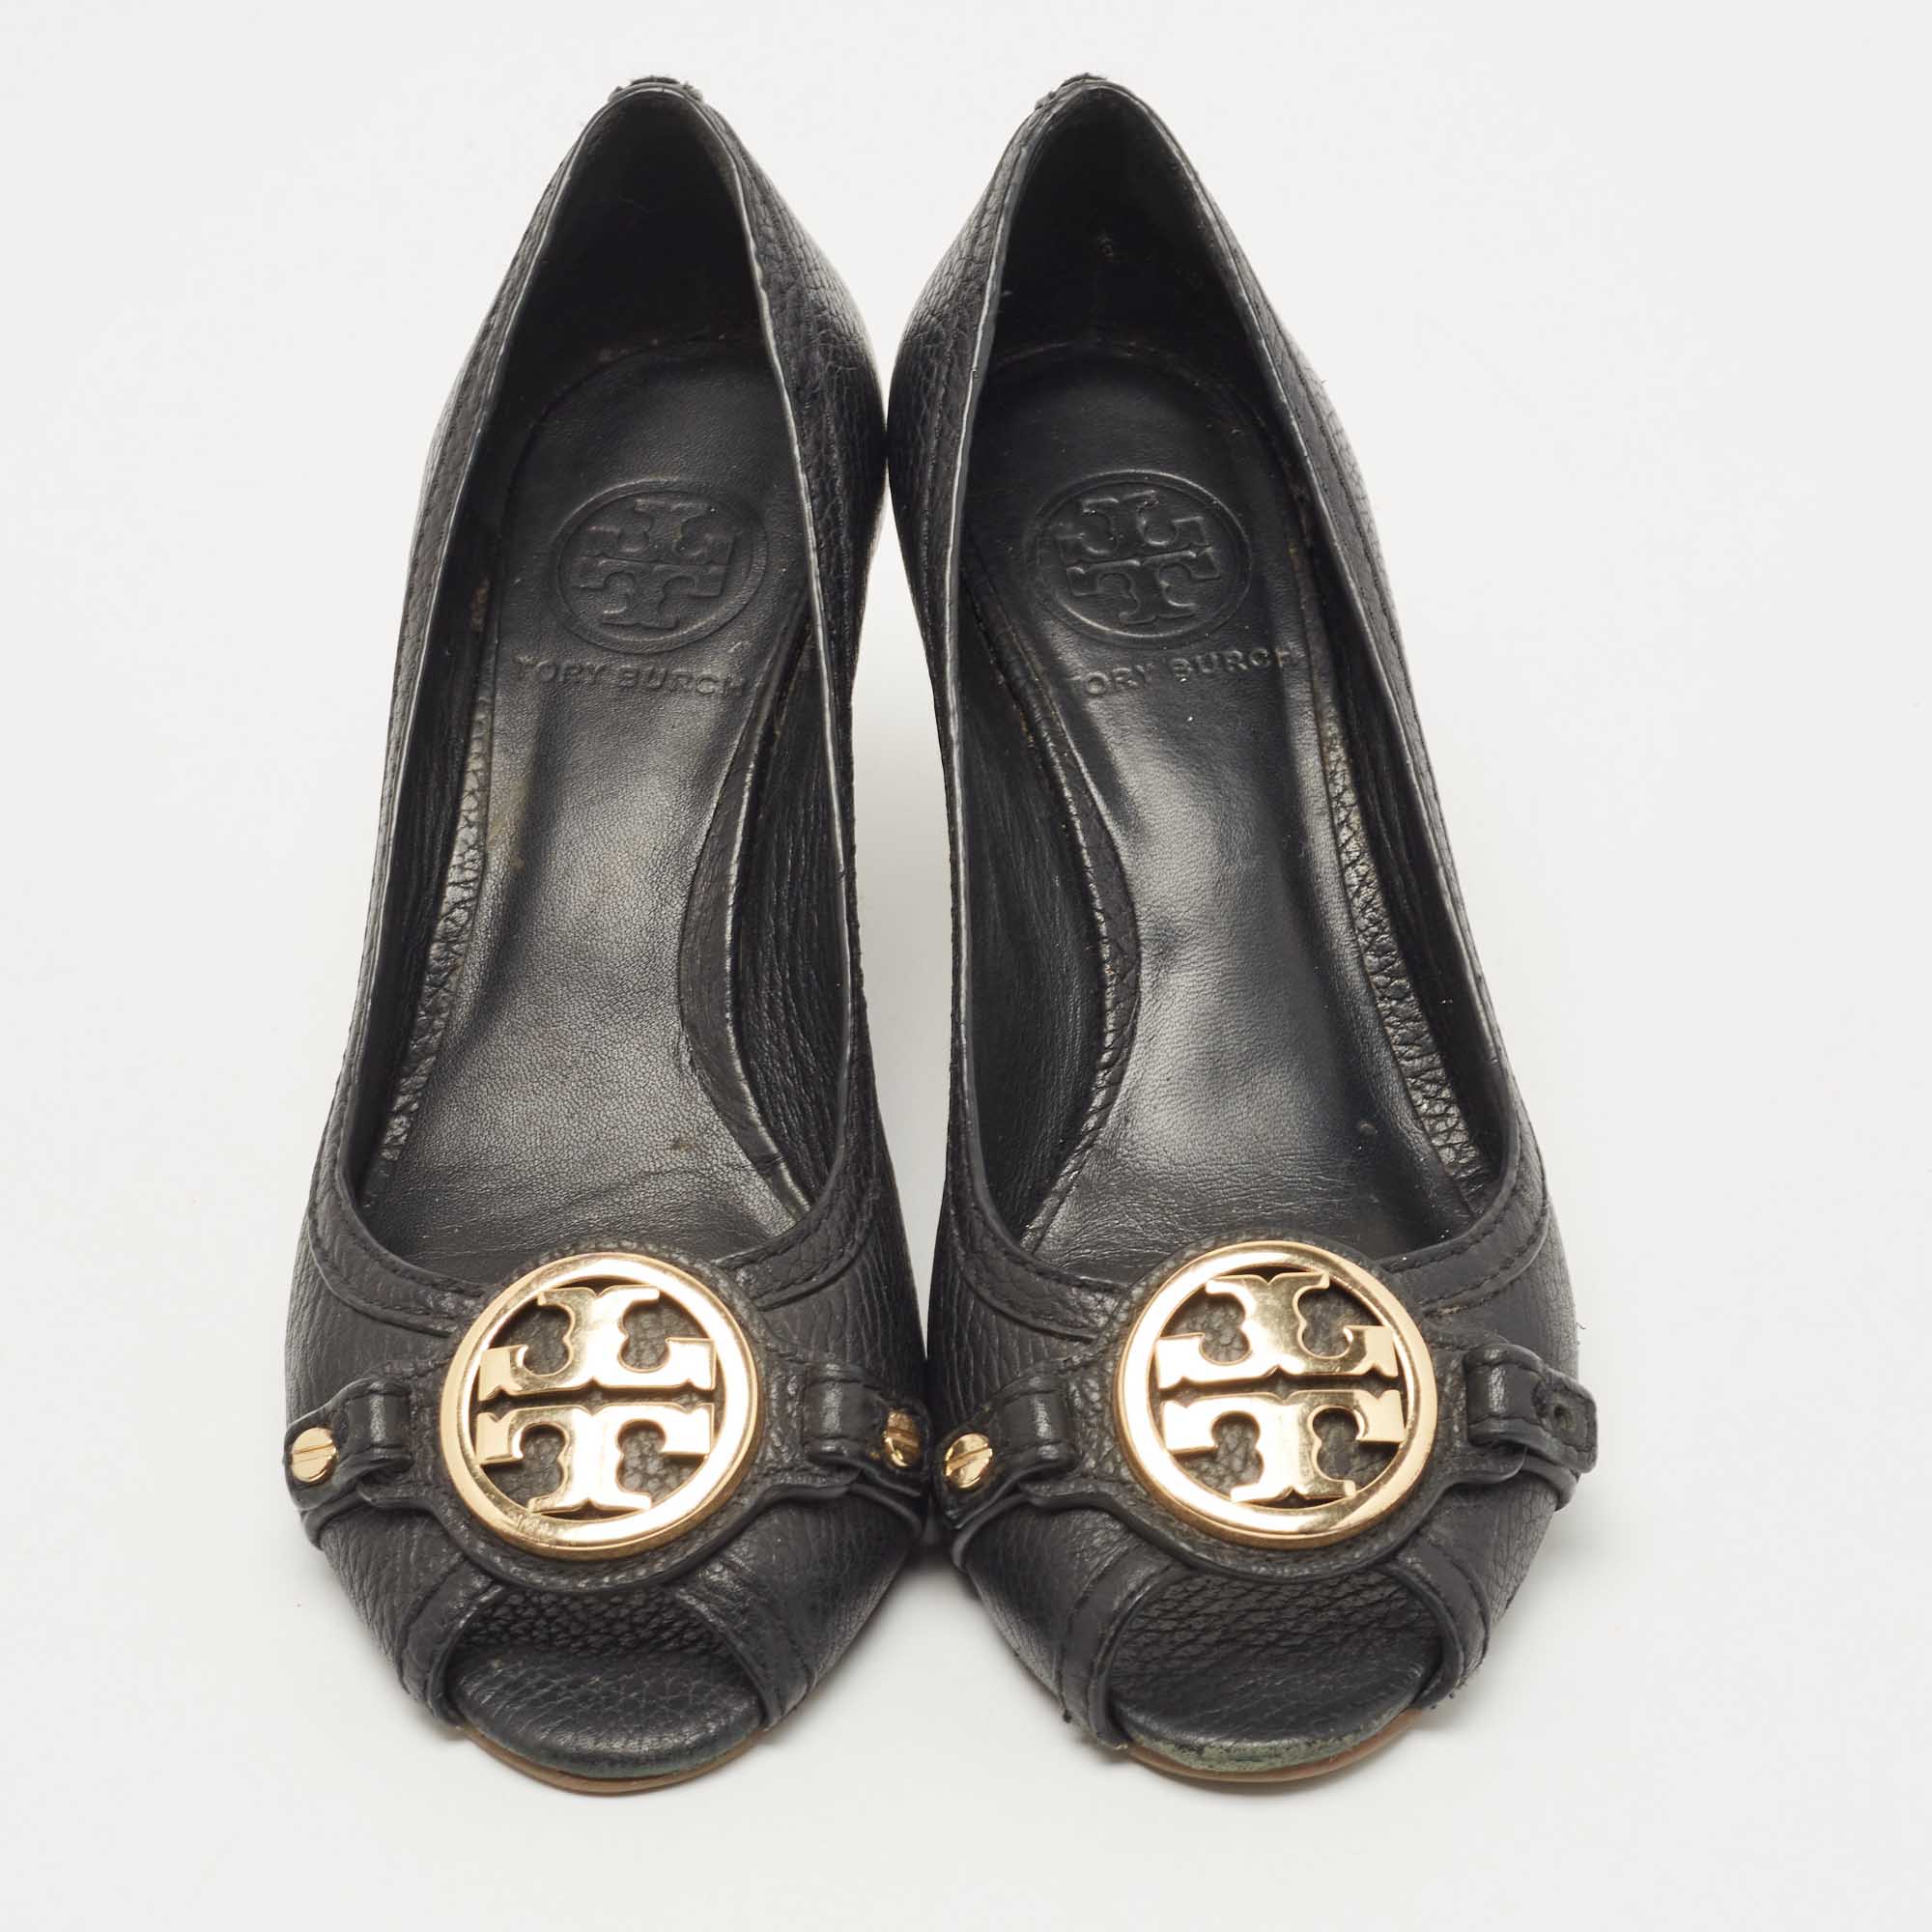 Tory Burch Black Leather Sally Wedge Pumps Size 39.5